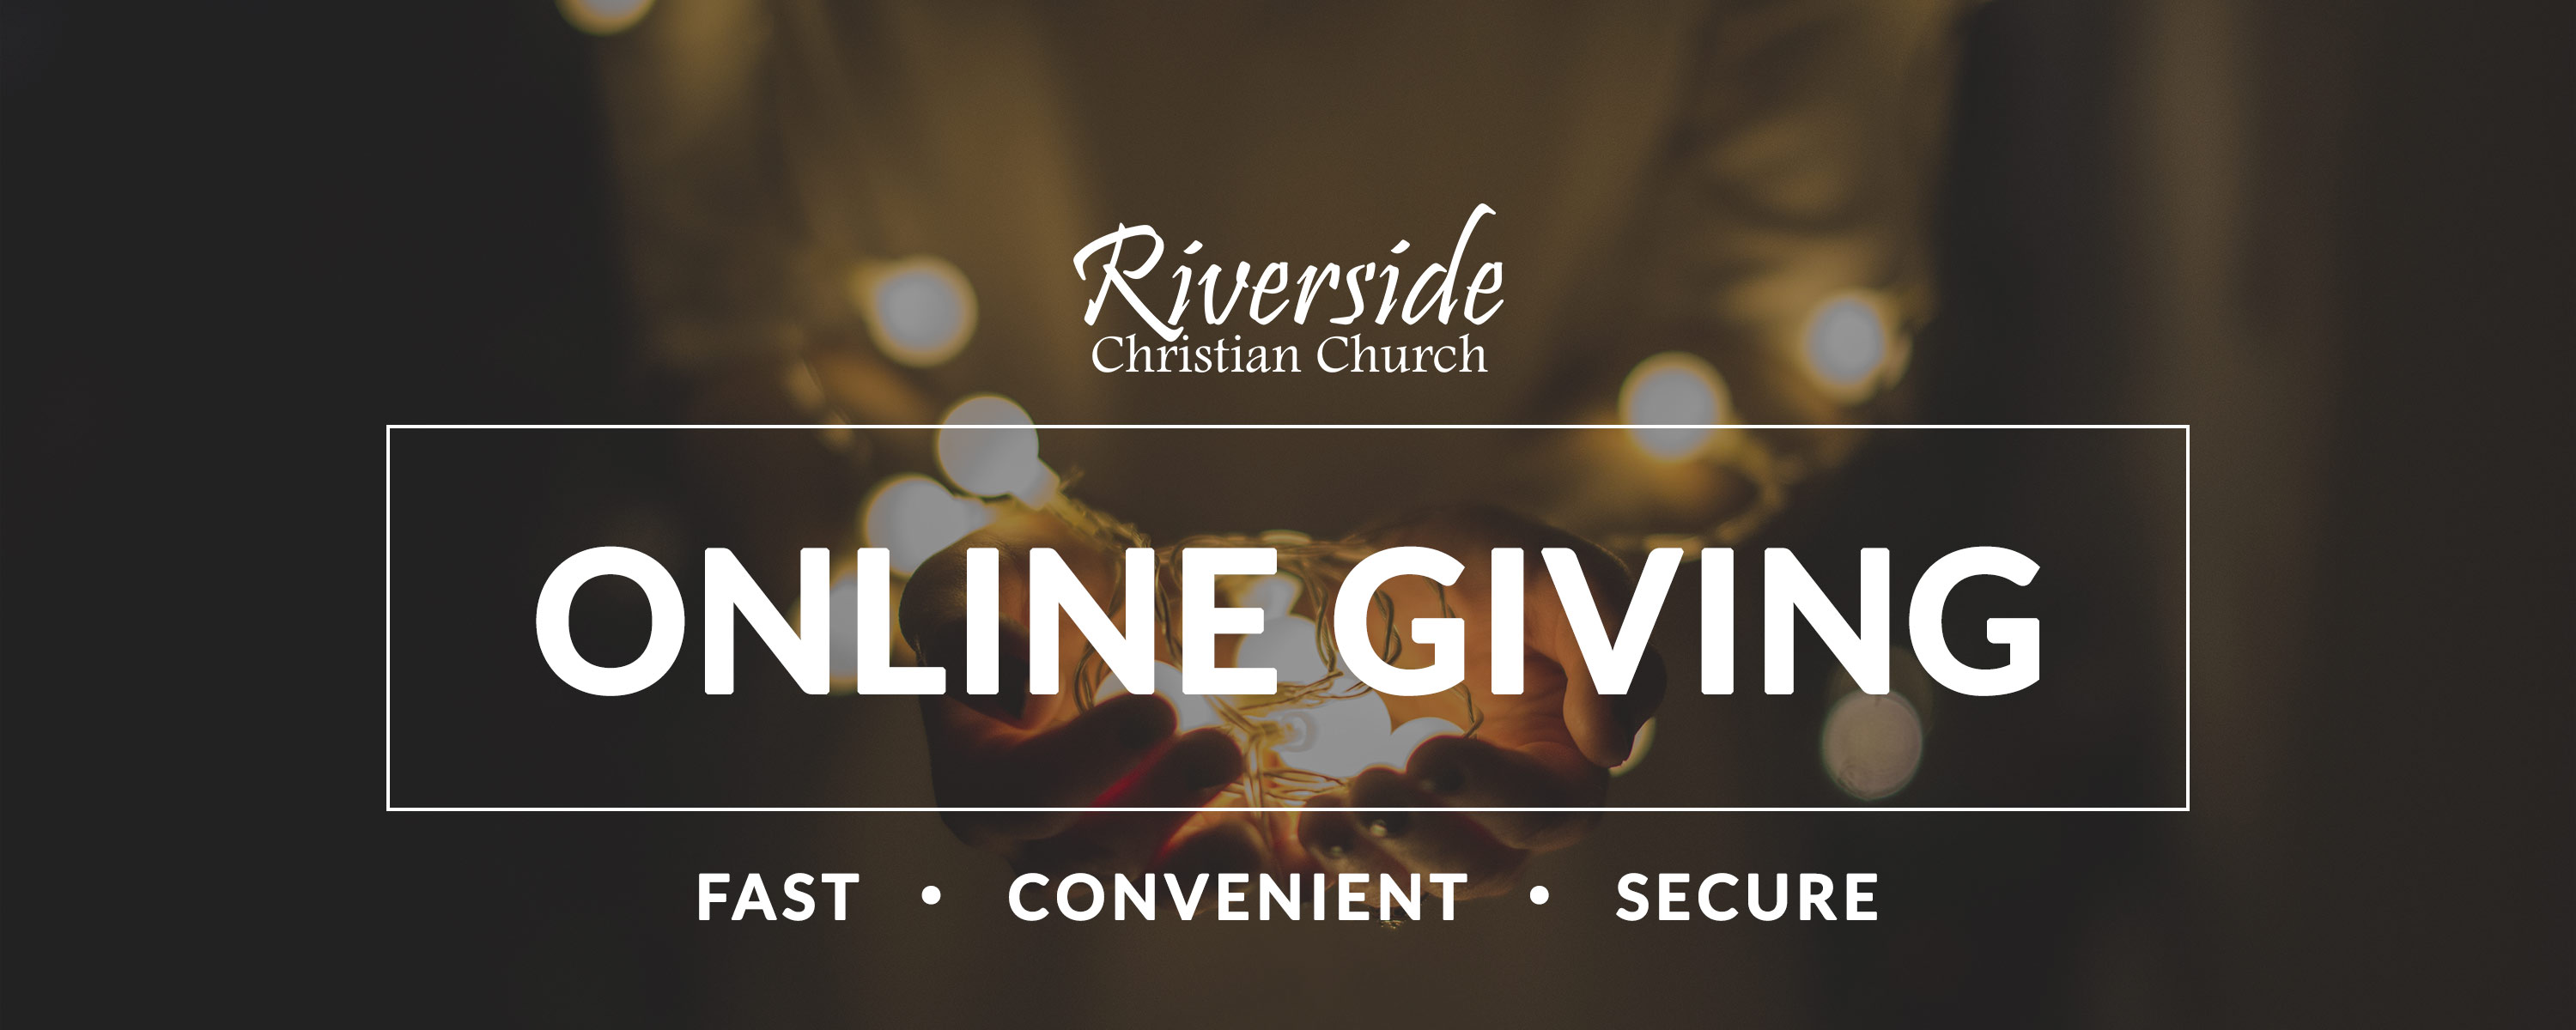 Donate securely to Riverside Christian Church